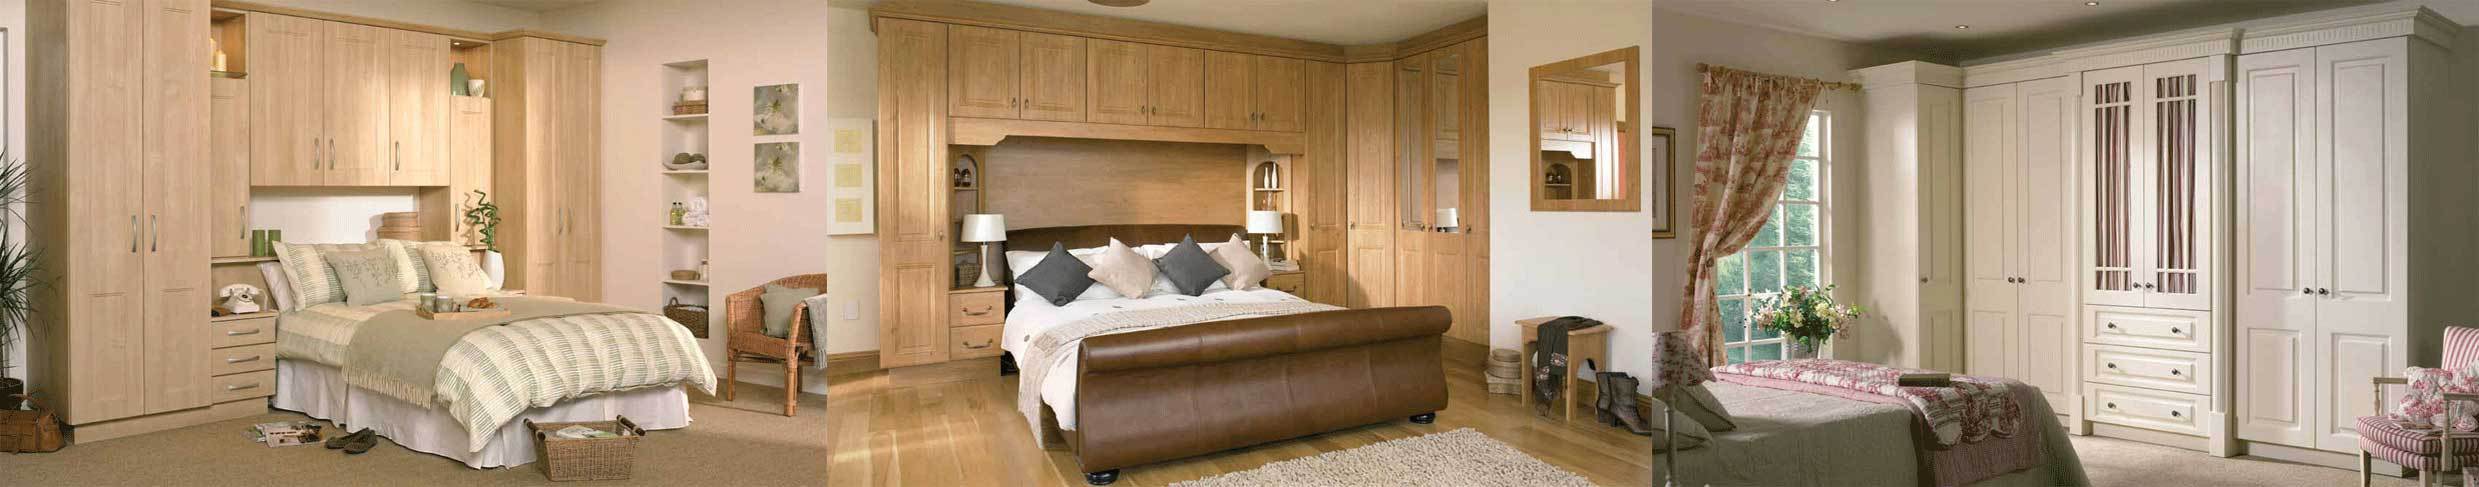 Specialists in fitted kitchens, fitted bedrooms and sliding door wardrobes in Mansfield